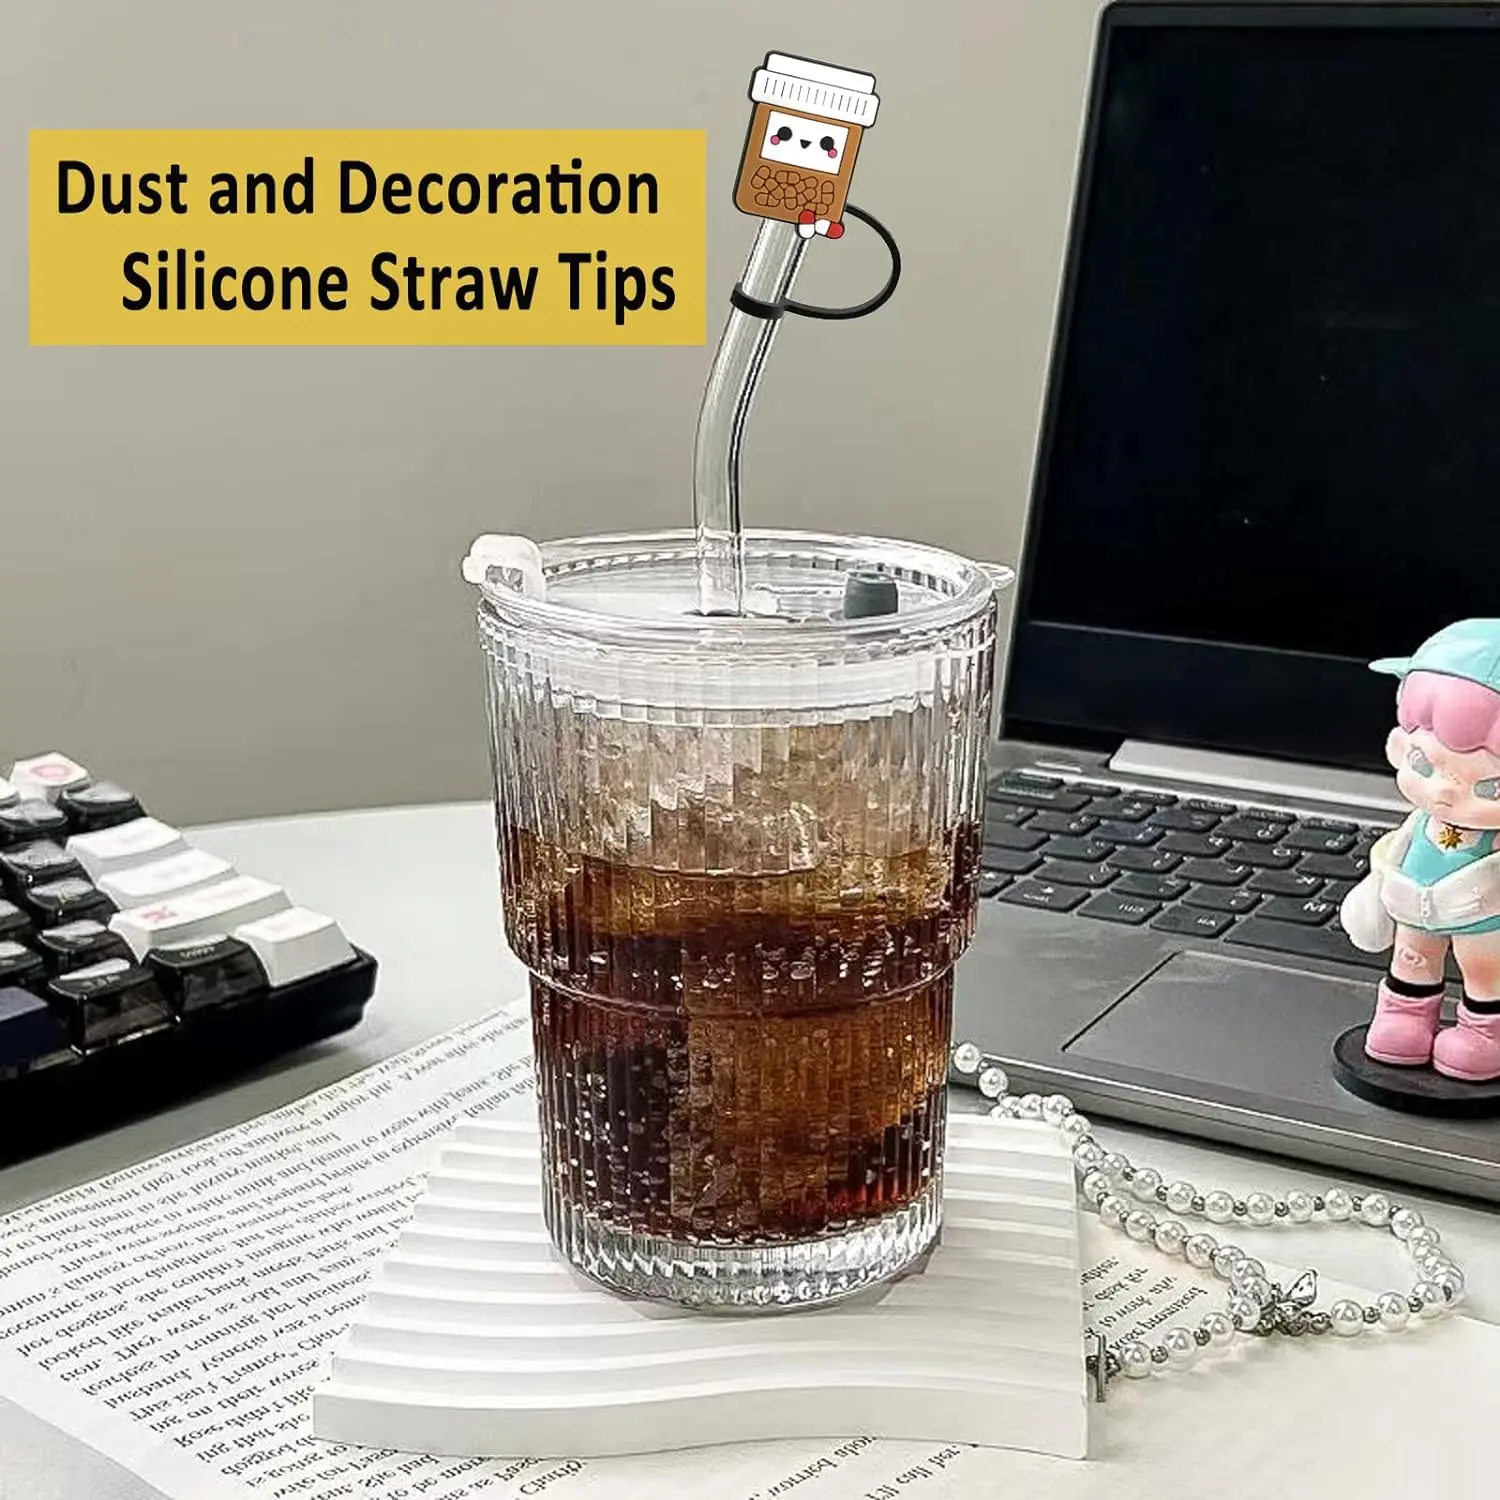 https://ae01.alicdn.com/kf/Sb9a7dc910eaf4cc9a9f87ebc34754de2B/6Pcs-Straw-Covers-Nurse-Theme-Straw-Toppers-for-Tumblers-Reusable-Drinking-Dust-Proof-Straw-Tip-Covers.jpg